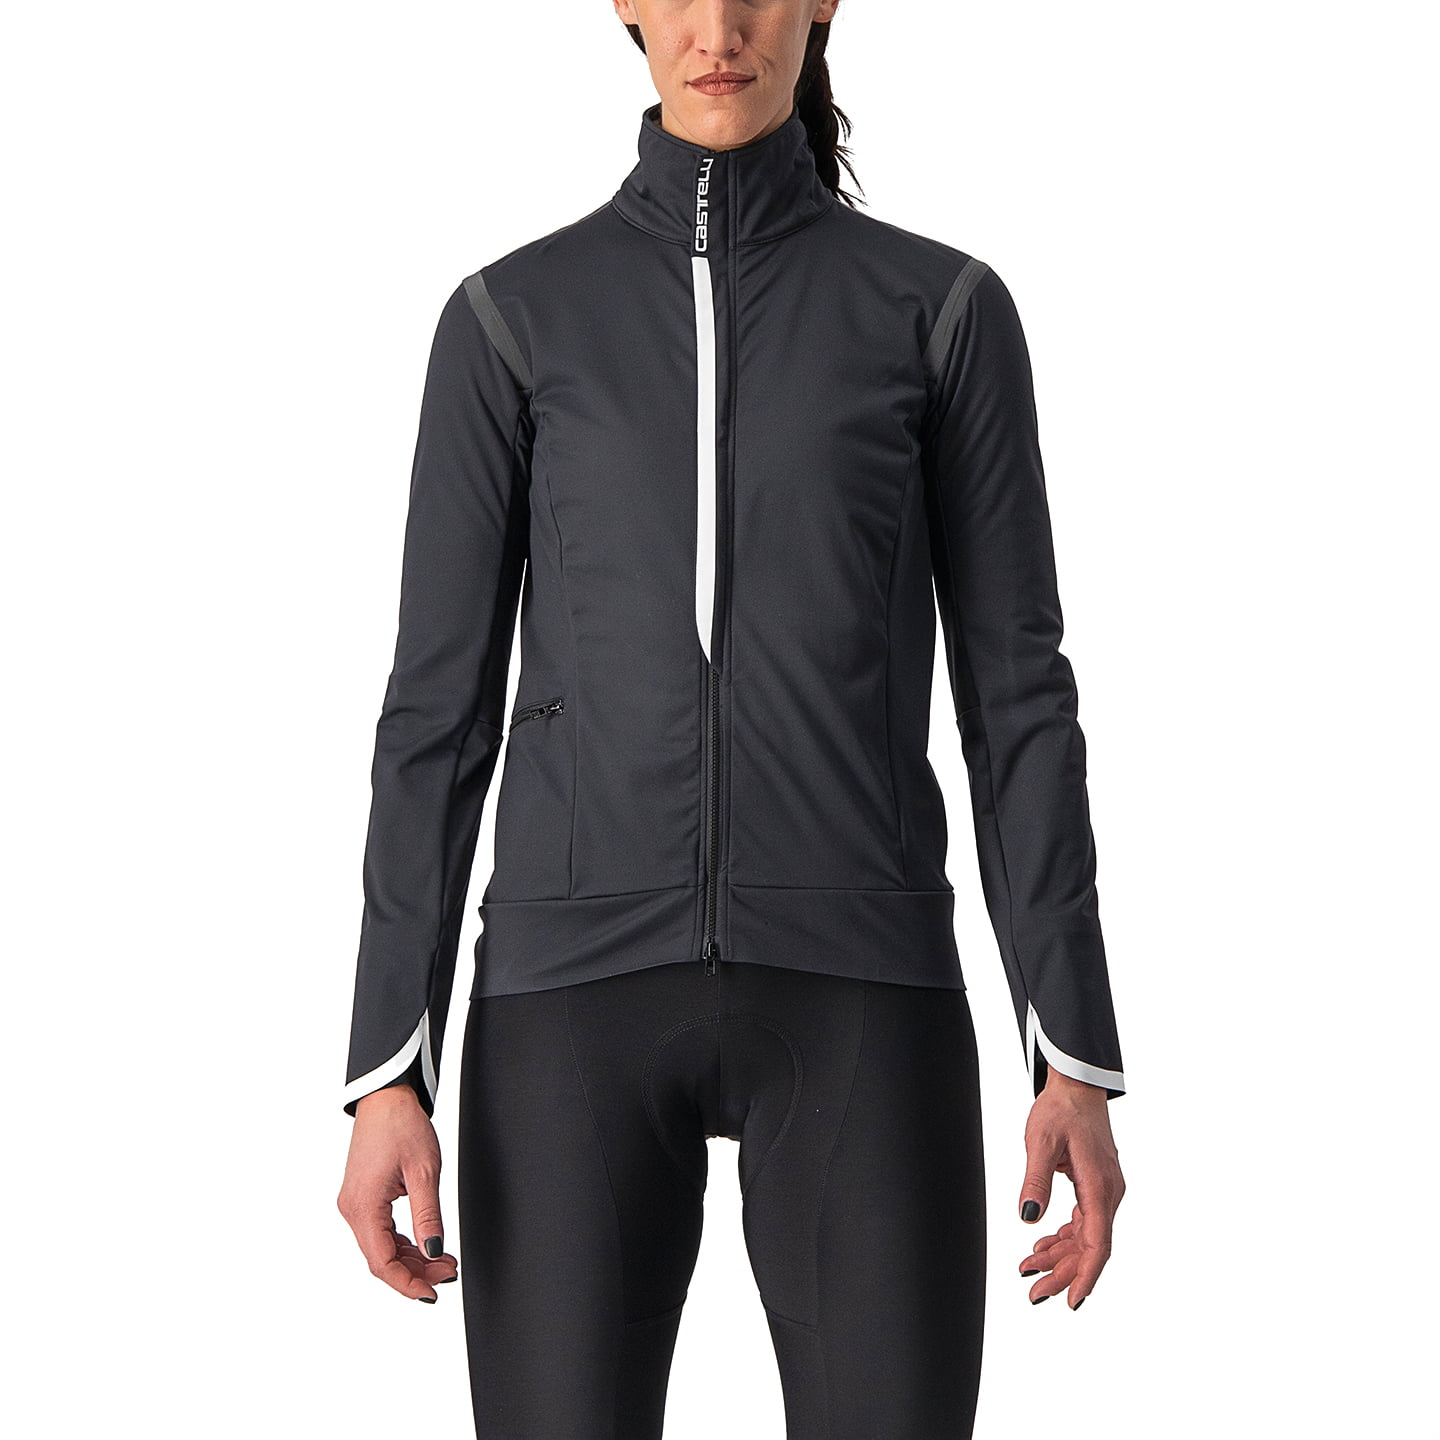 CASTELLI Alpha Ultimate Women’s Winter Jacket Women’s Thermal Jacket, size M, Cycle jacket, Cycling clothing